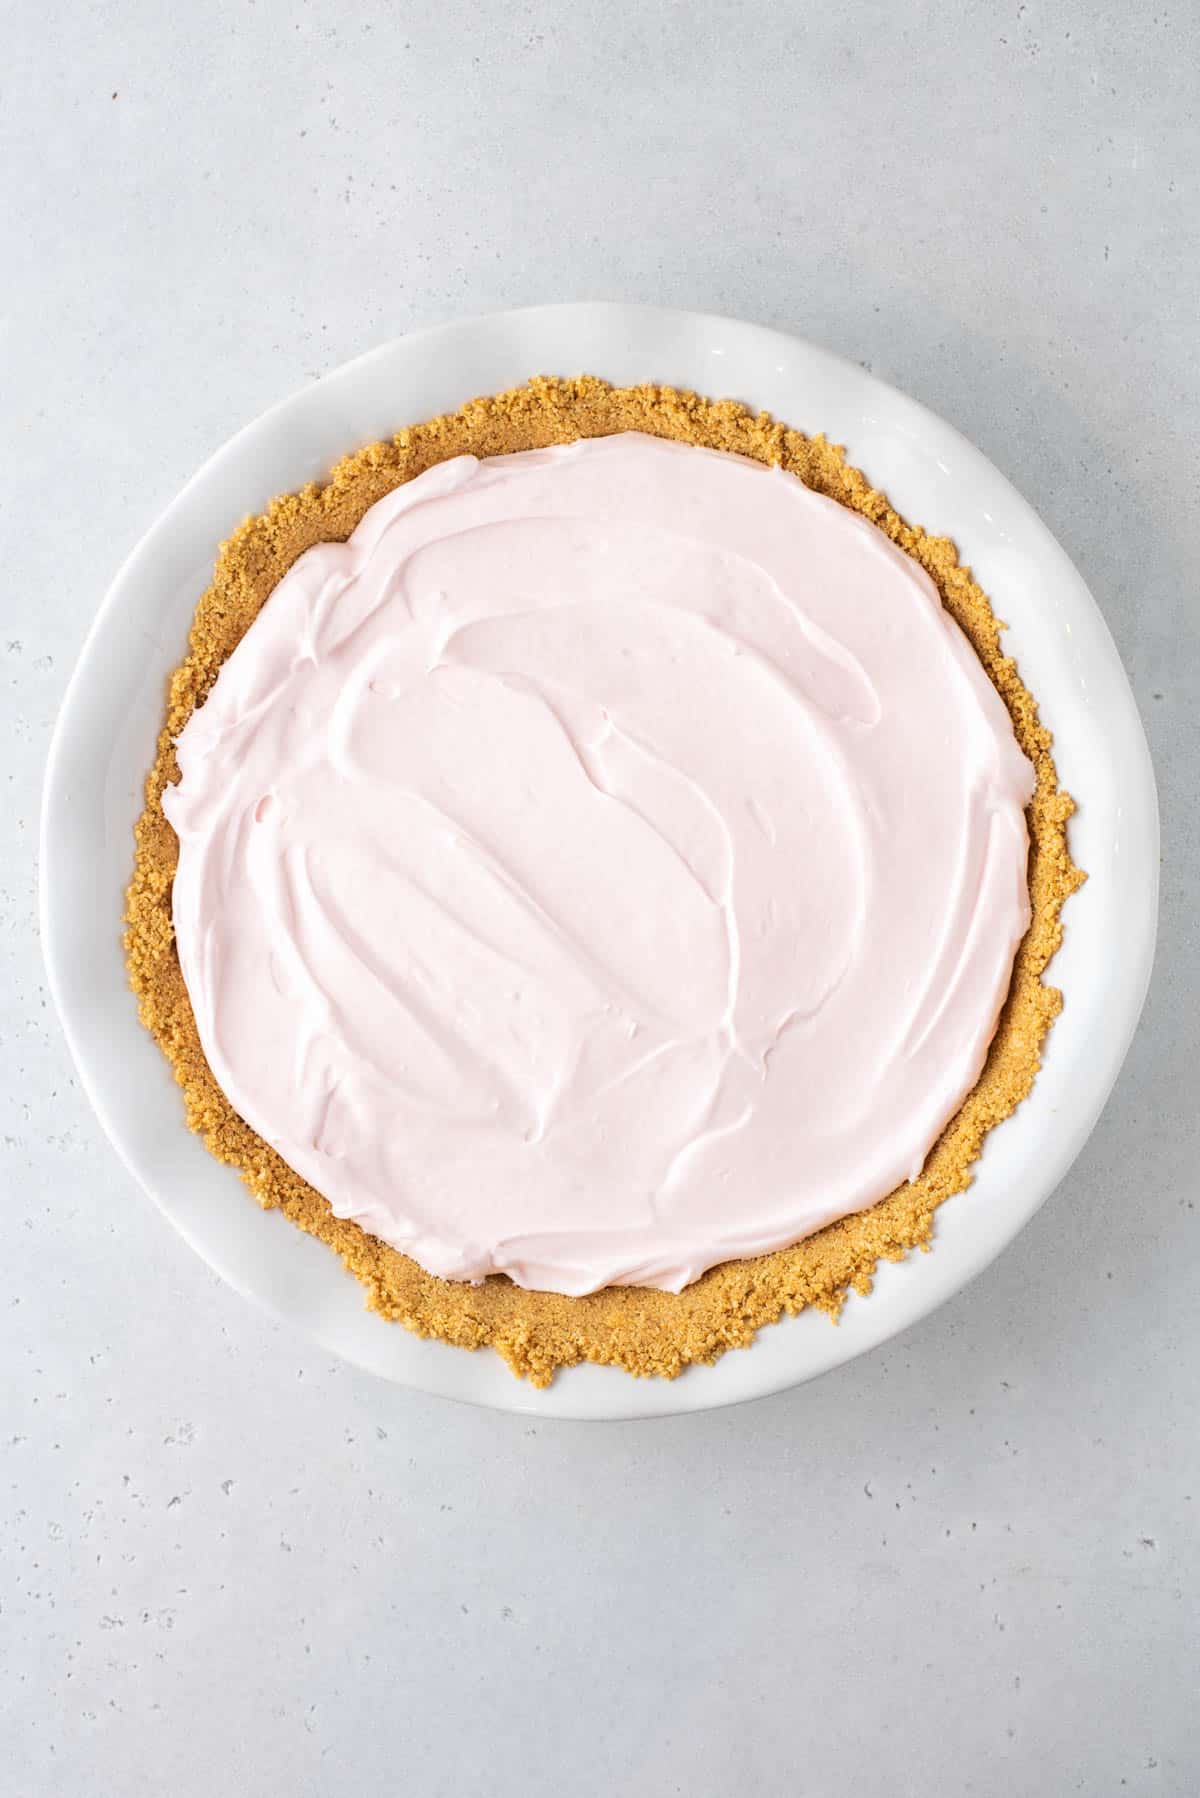 kool aid pie filling with graham cracker crust in a white pie dish